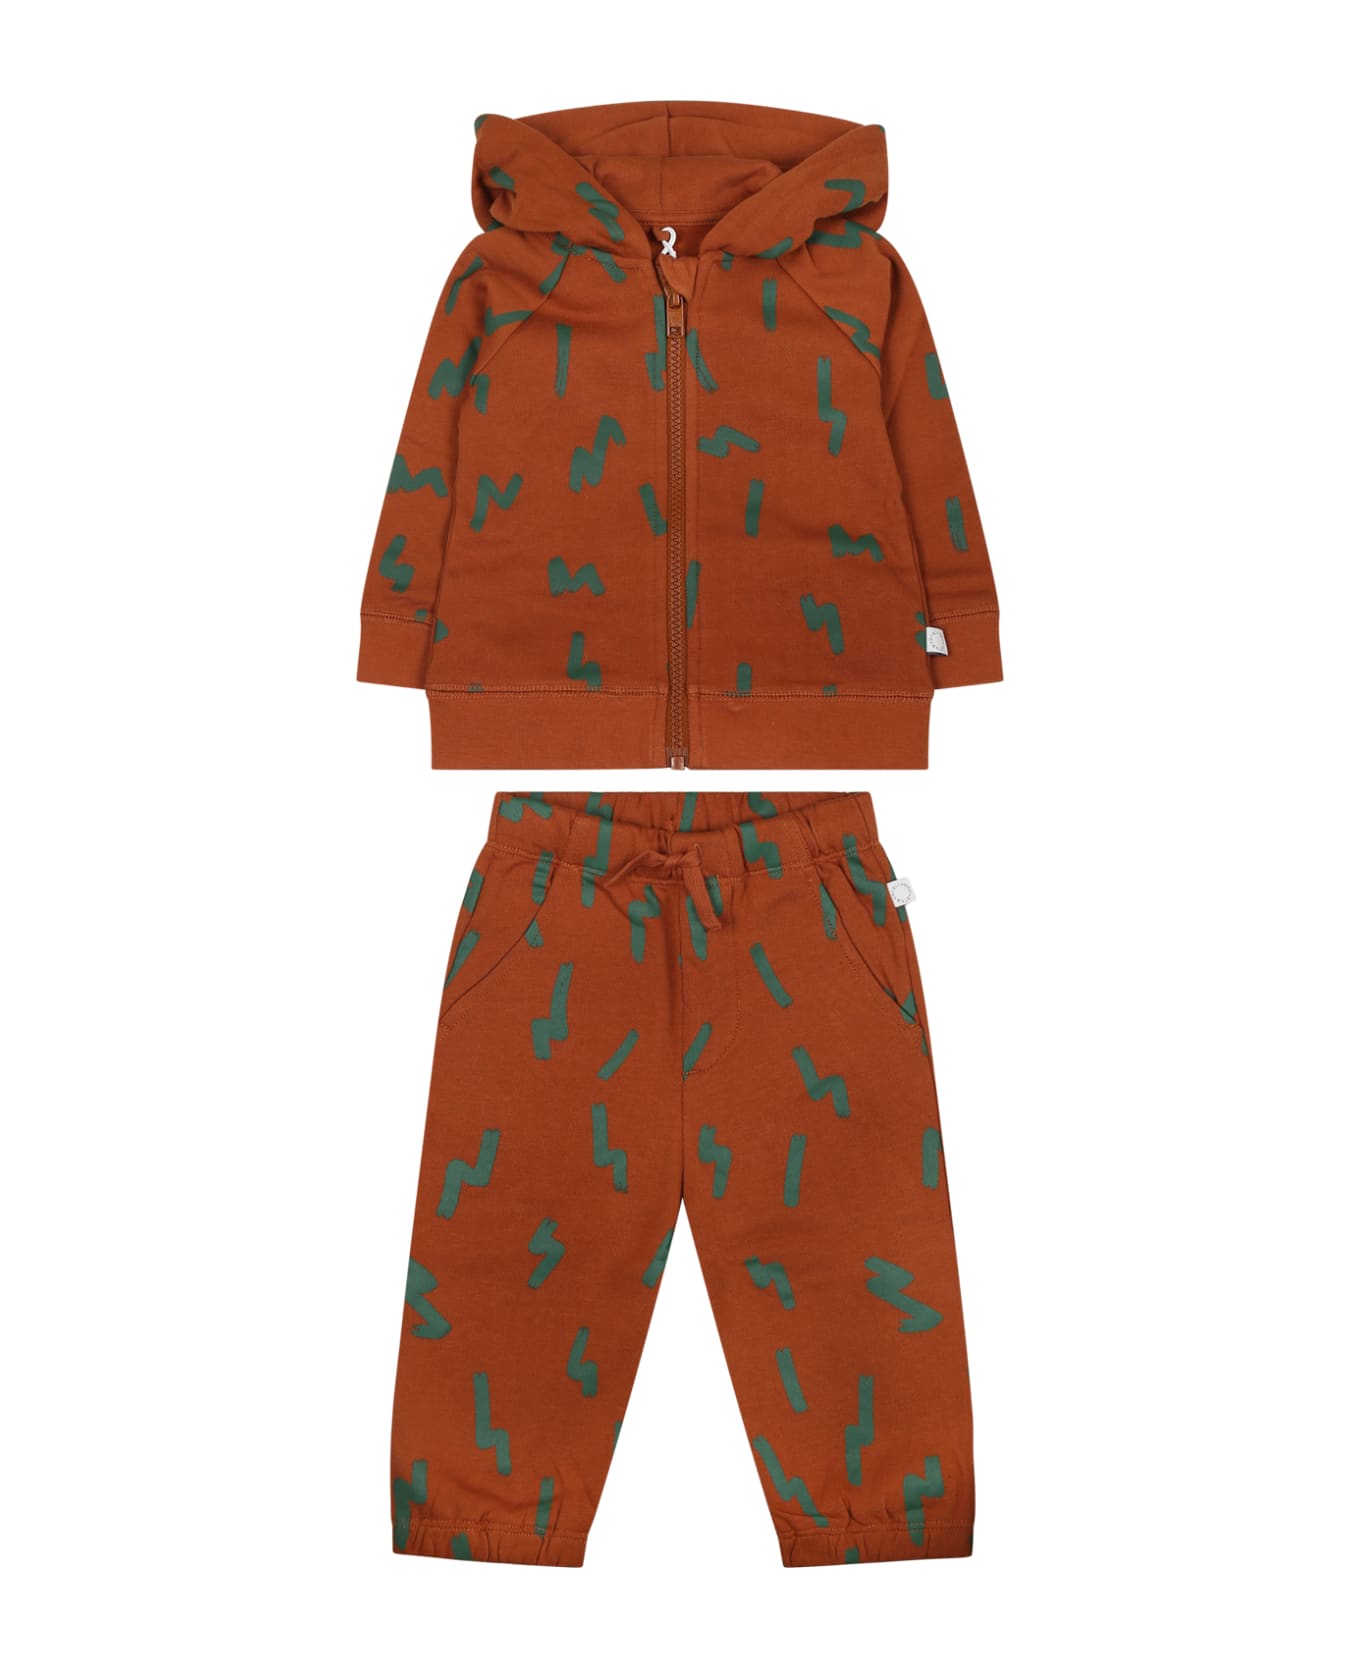 Stella McCartney Kids Beige Suit For Baby Boy With Print - Brown